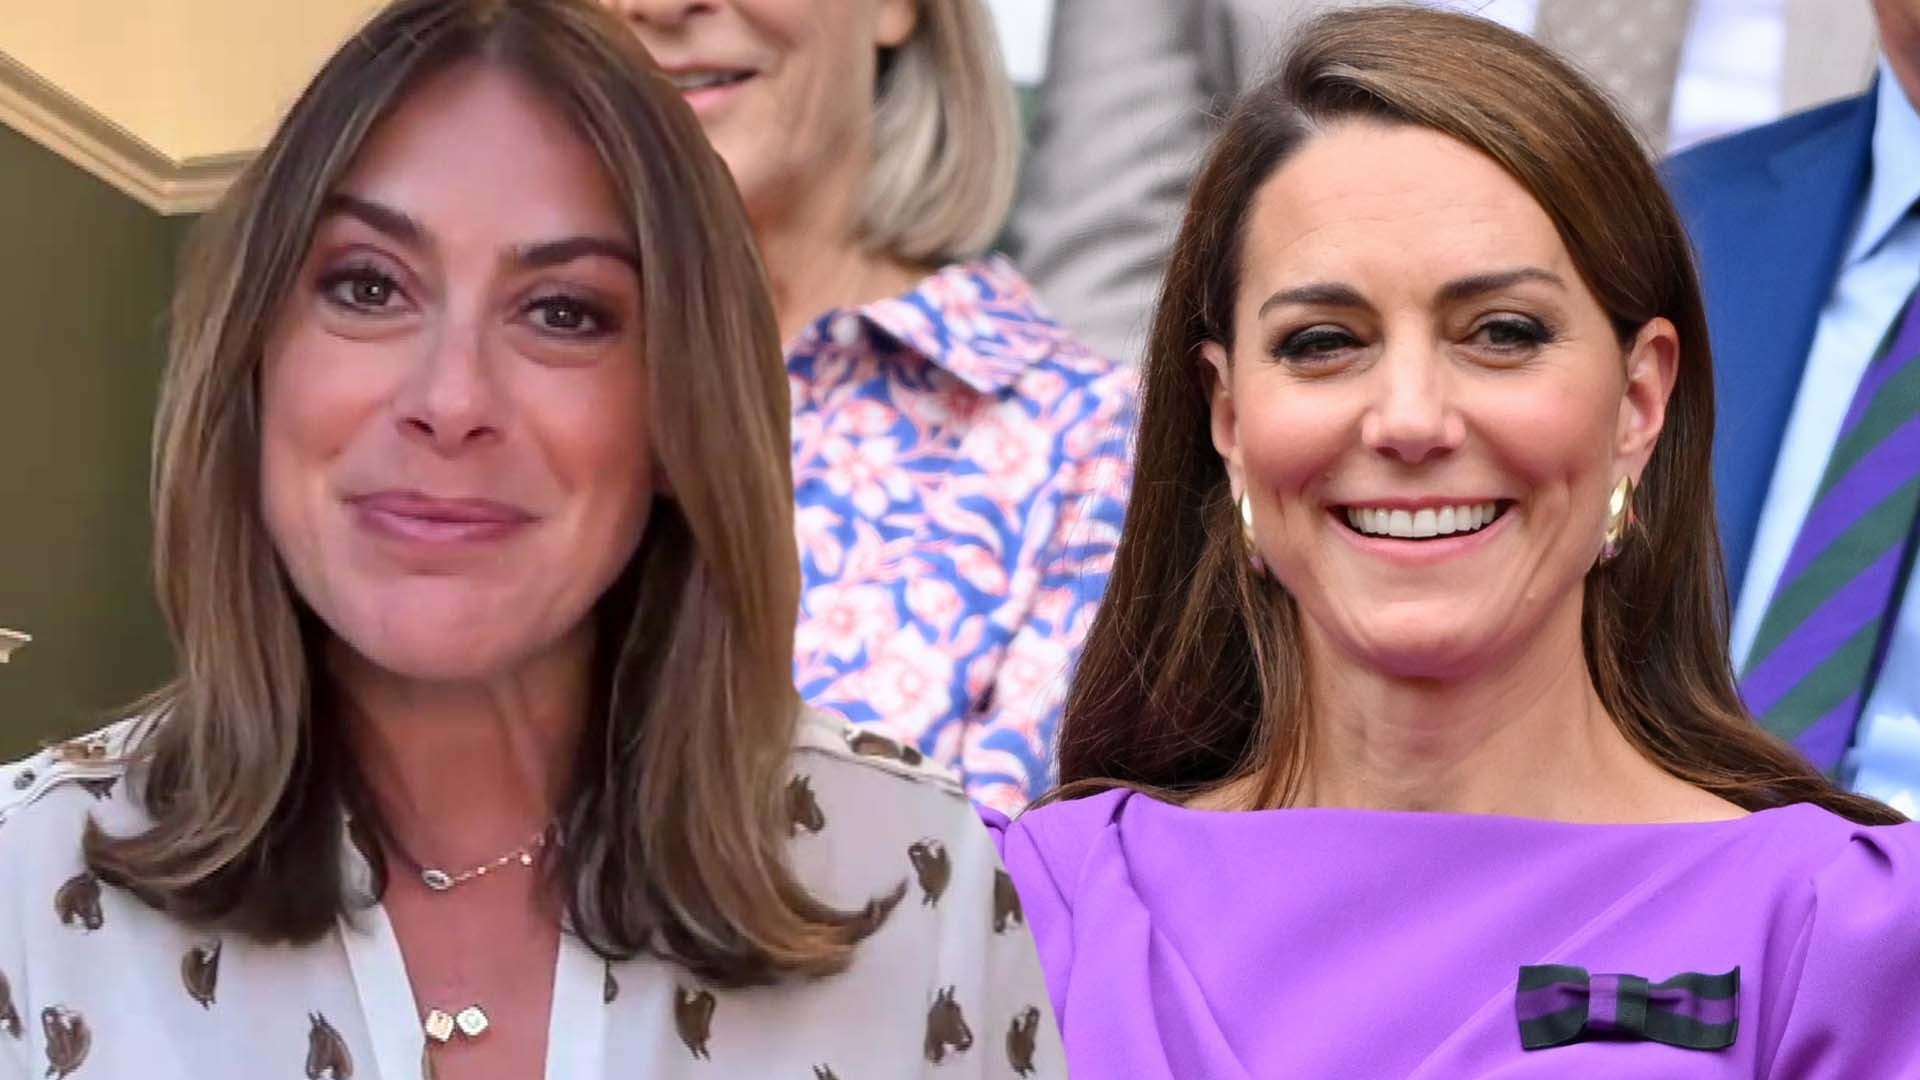 Why Kate Middleton's 'Unlikely' to Make More Summer Appearances After Wimbledon (Royal Expert)